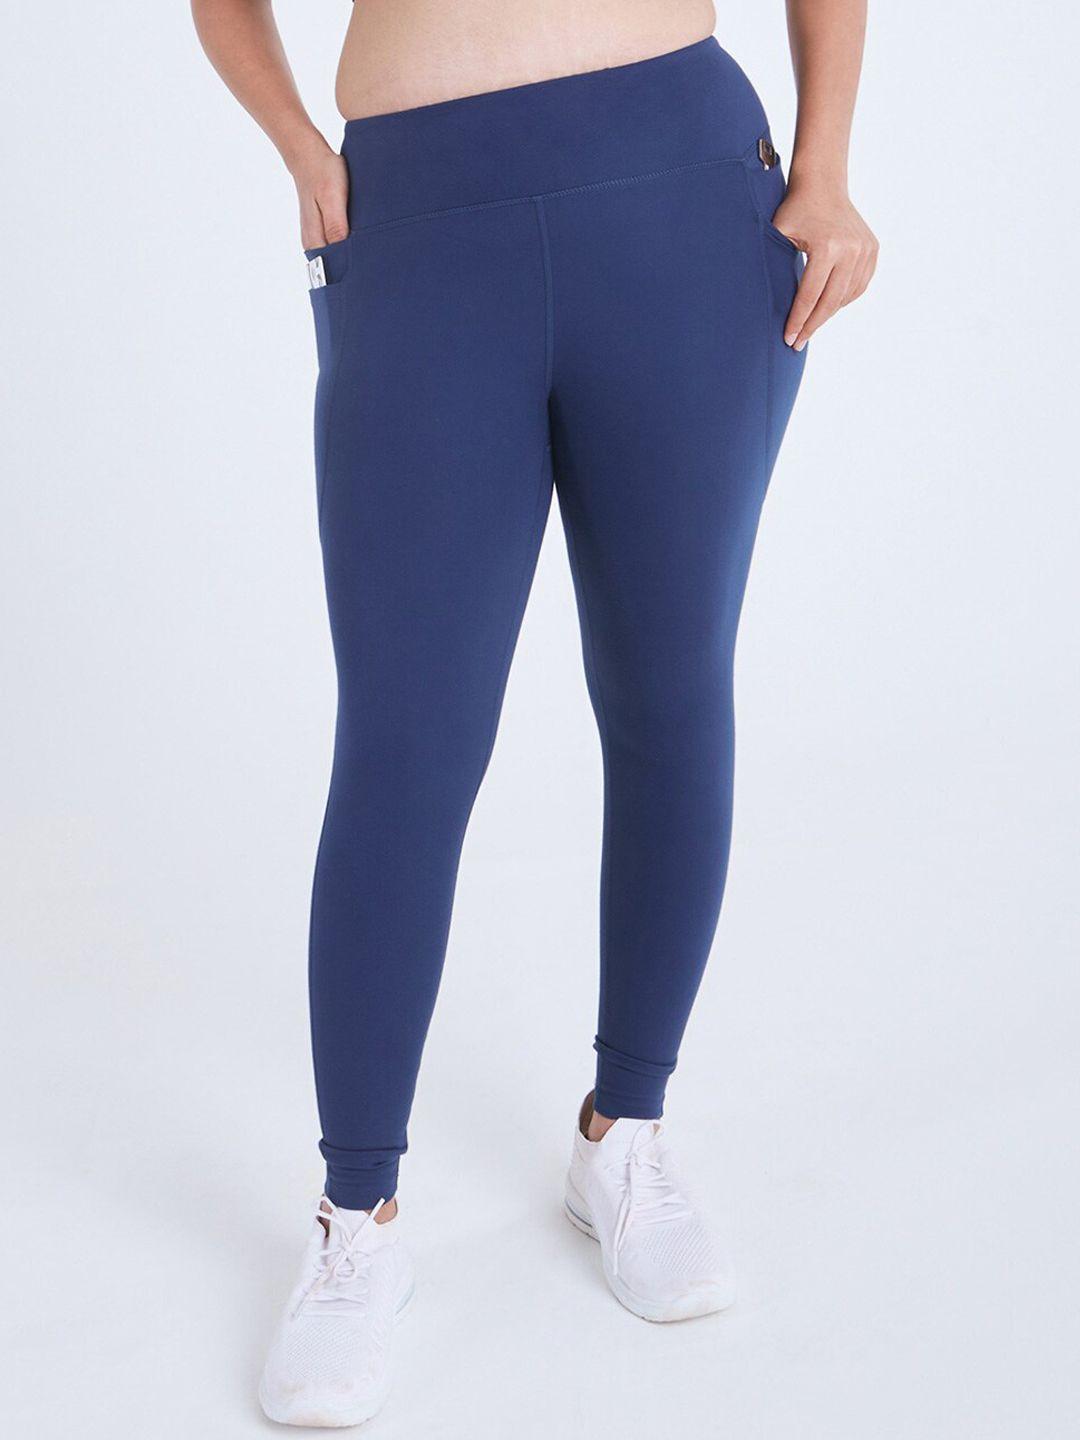 Blissclub The Ultimate Pocket Goals Leggings with 6 pockets